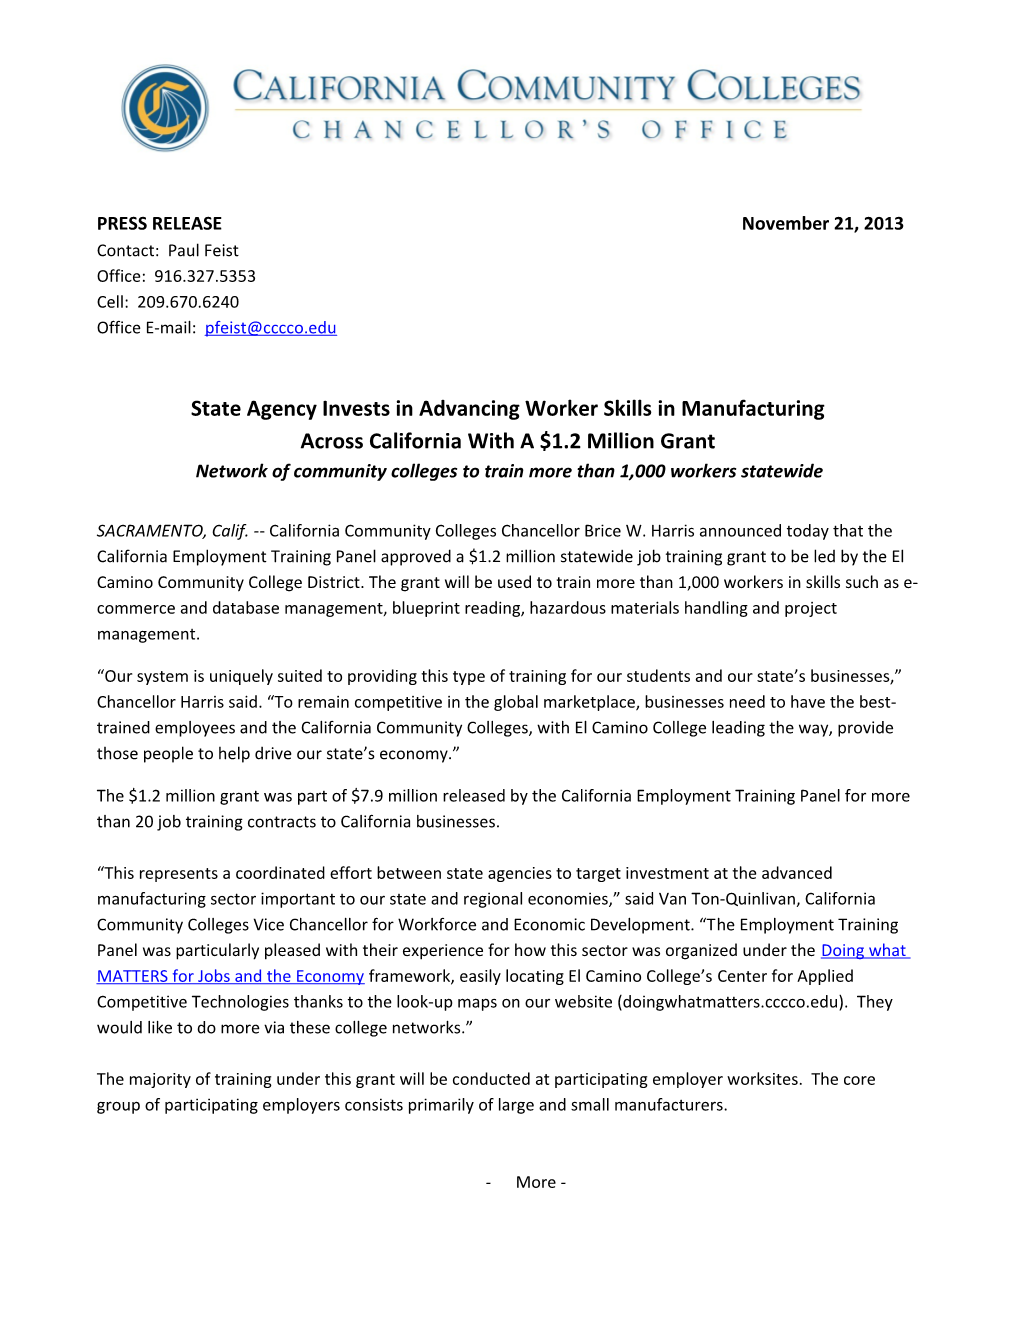 State Agency Invests in Advancing Worker Skills in Manufacturing